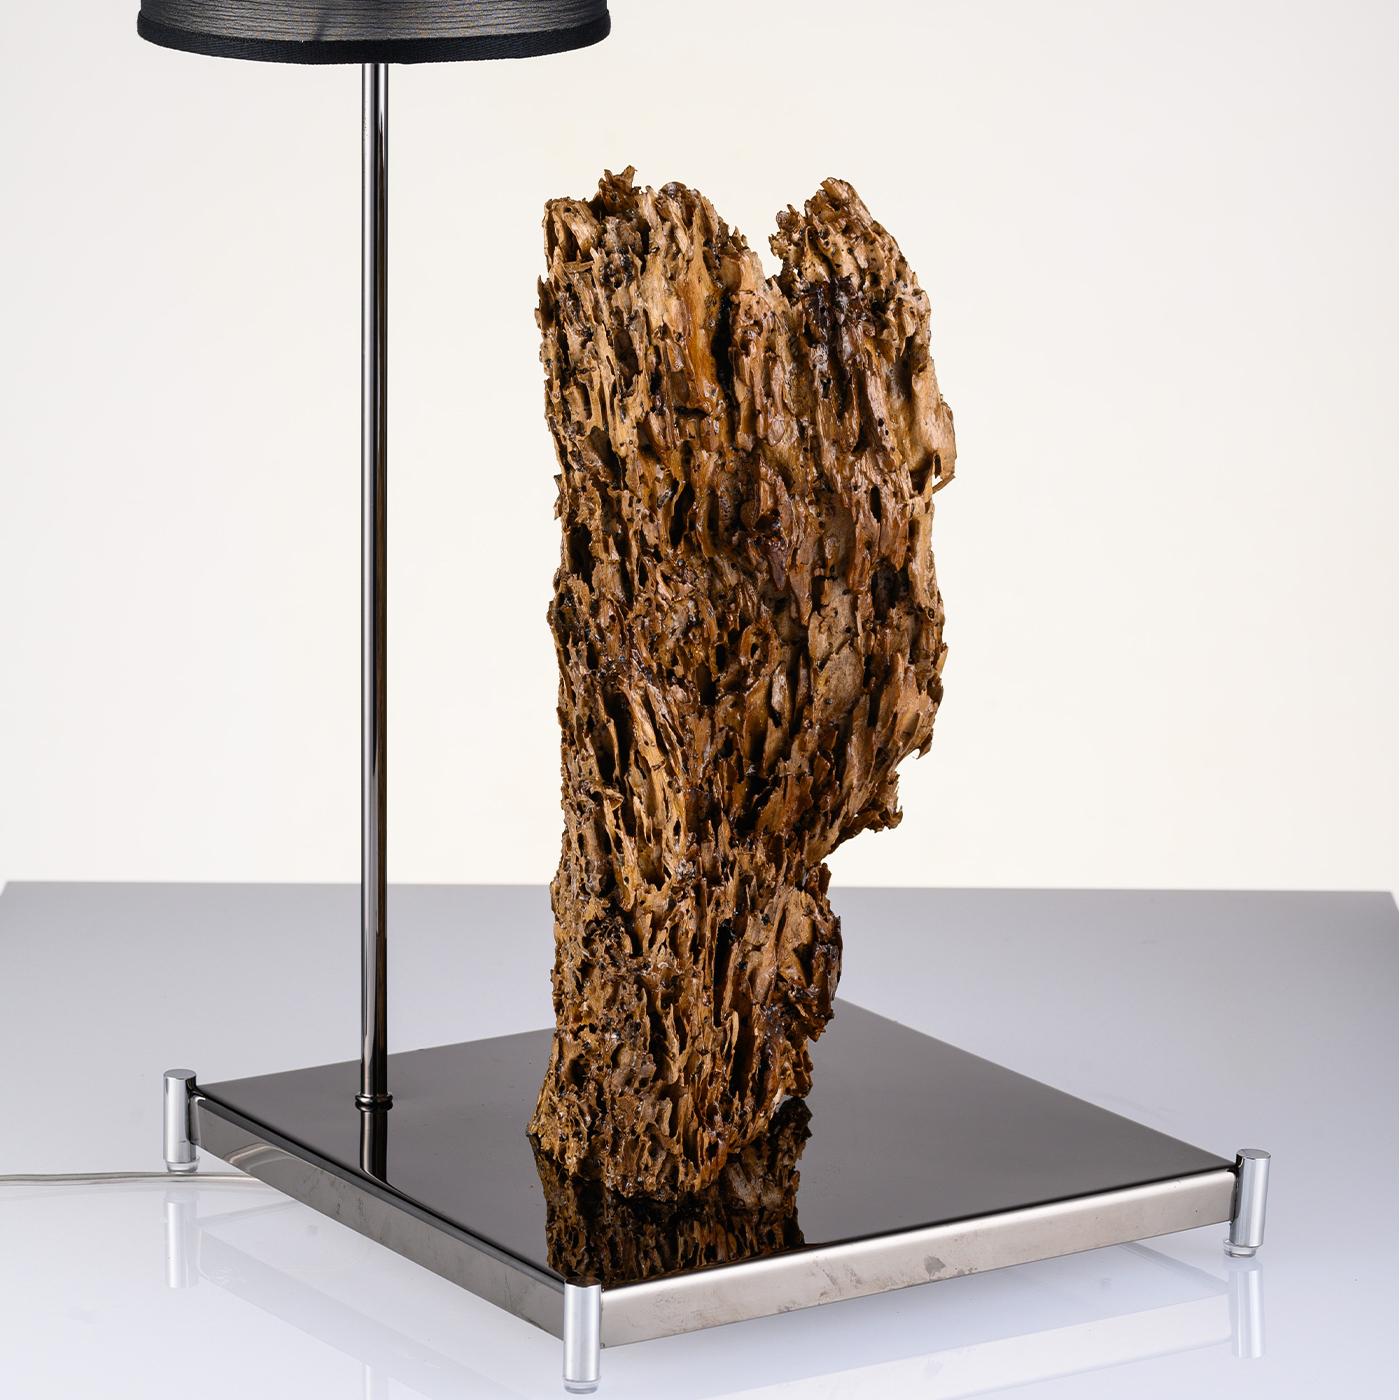 Exquisitely unique, Petros is the creation of lighting sculptures featuring sea wood from the Amalfi Coast. For the Nido D'Ape Sculpture, once carefully selected and prepared, the wood is set onto a base in reflective black stainless steel, engraved